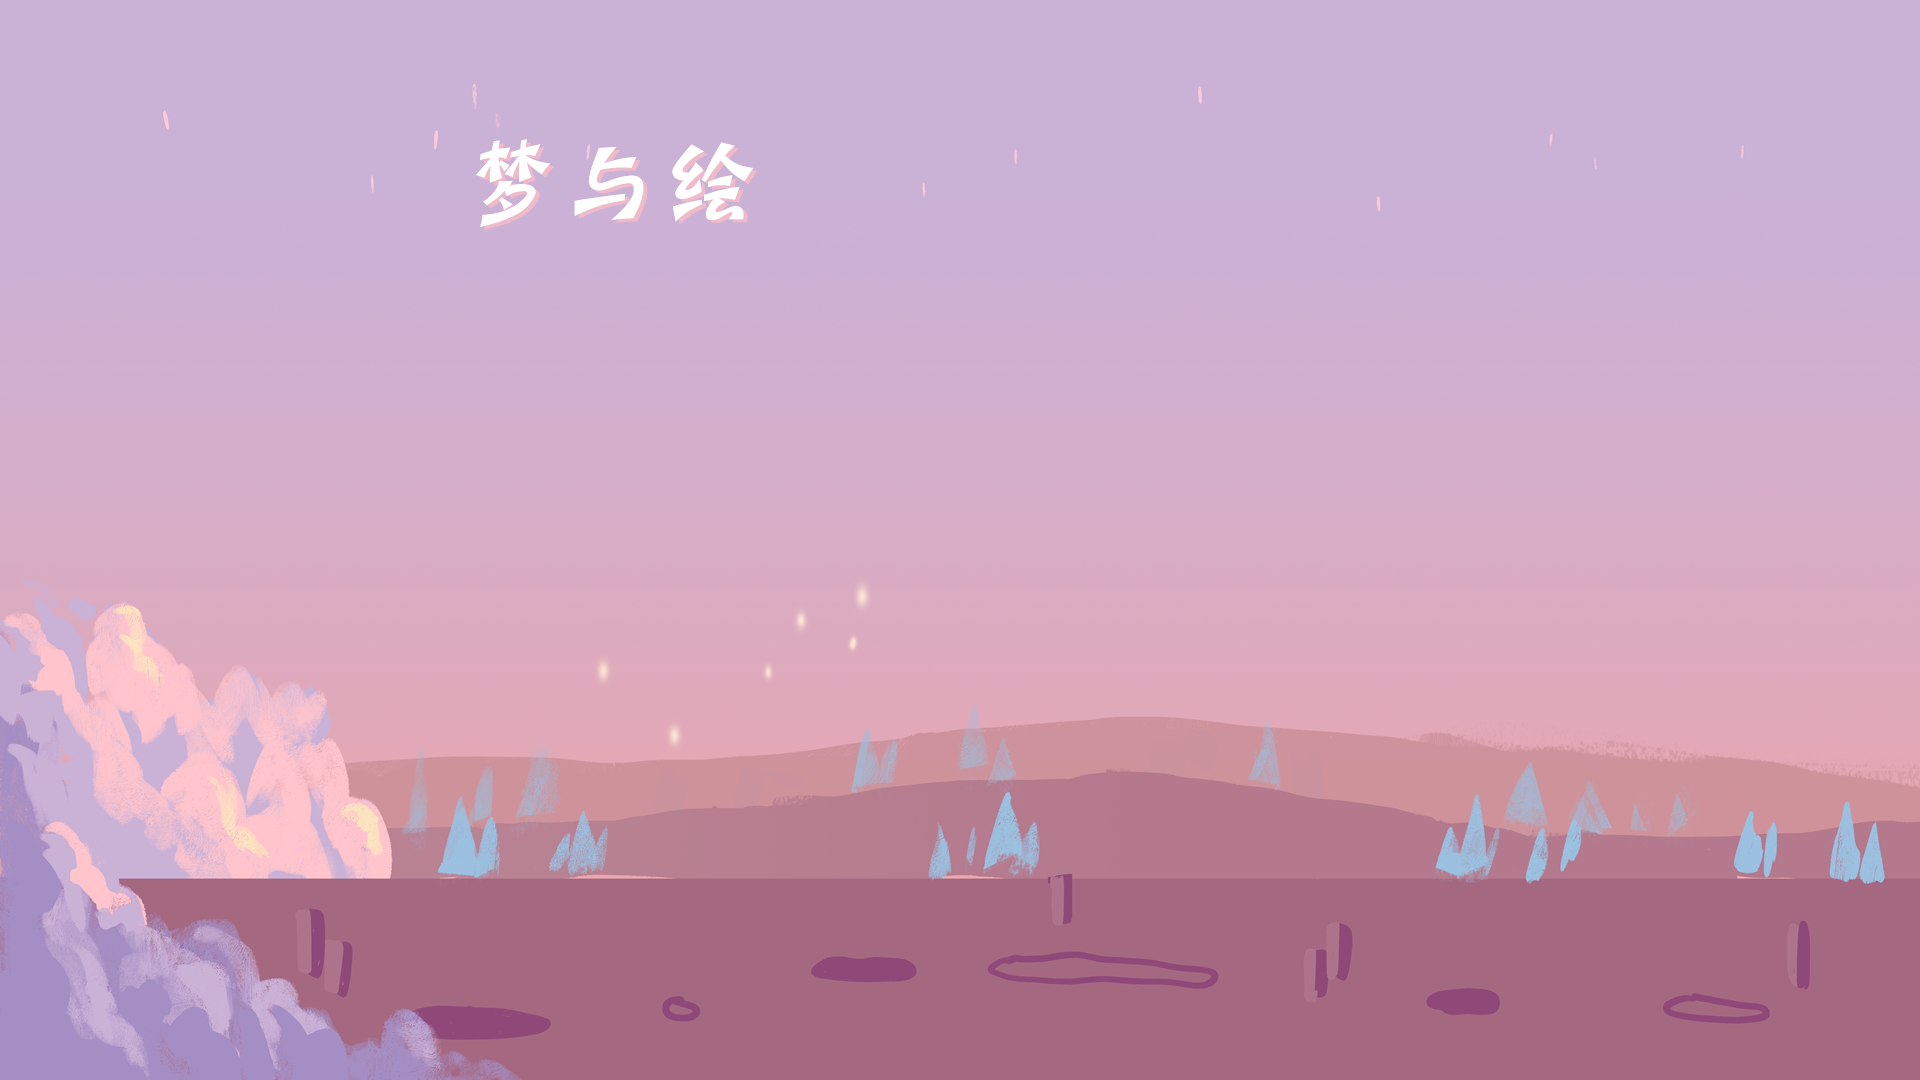 Banner of 꿈과 그림 